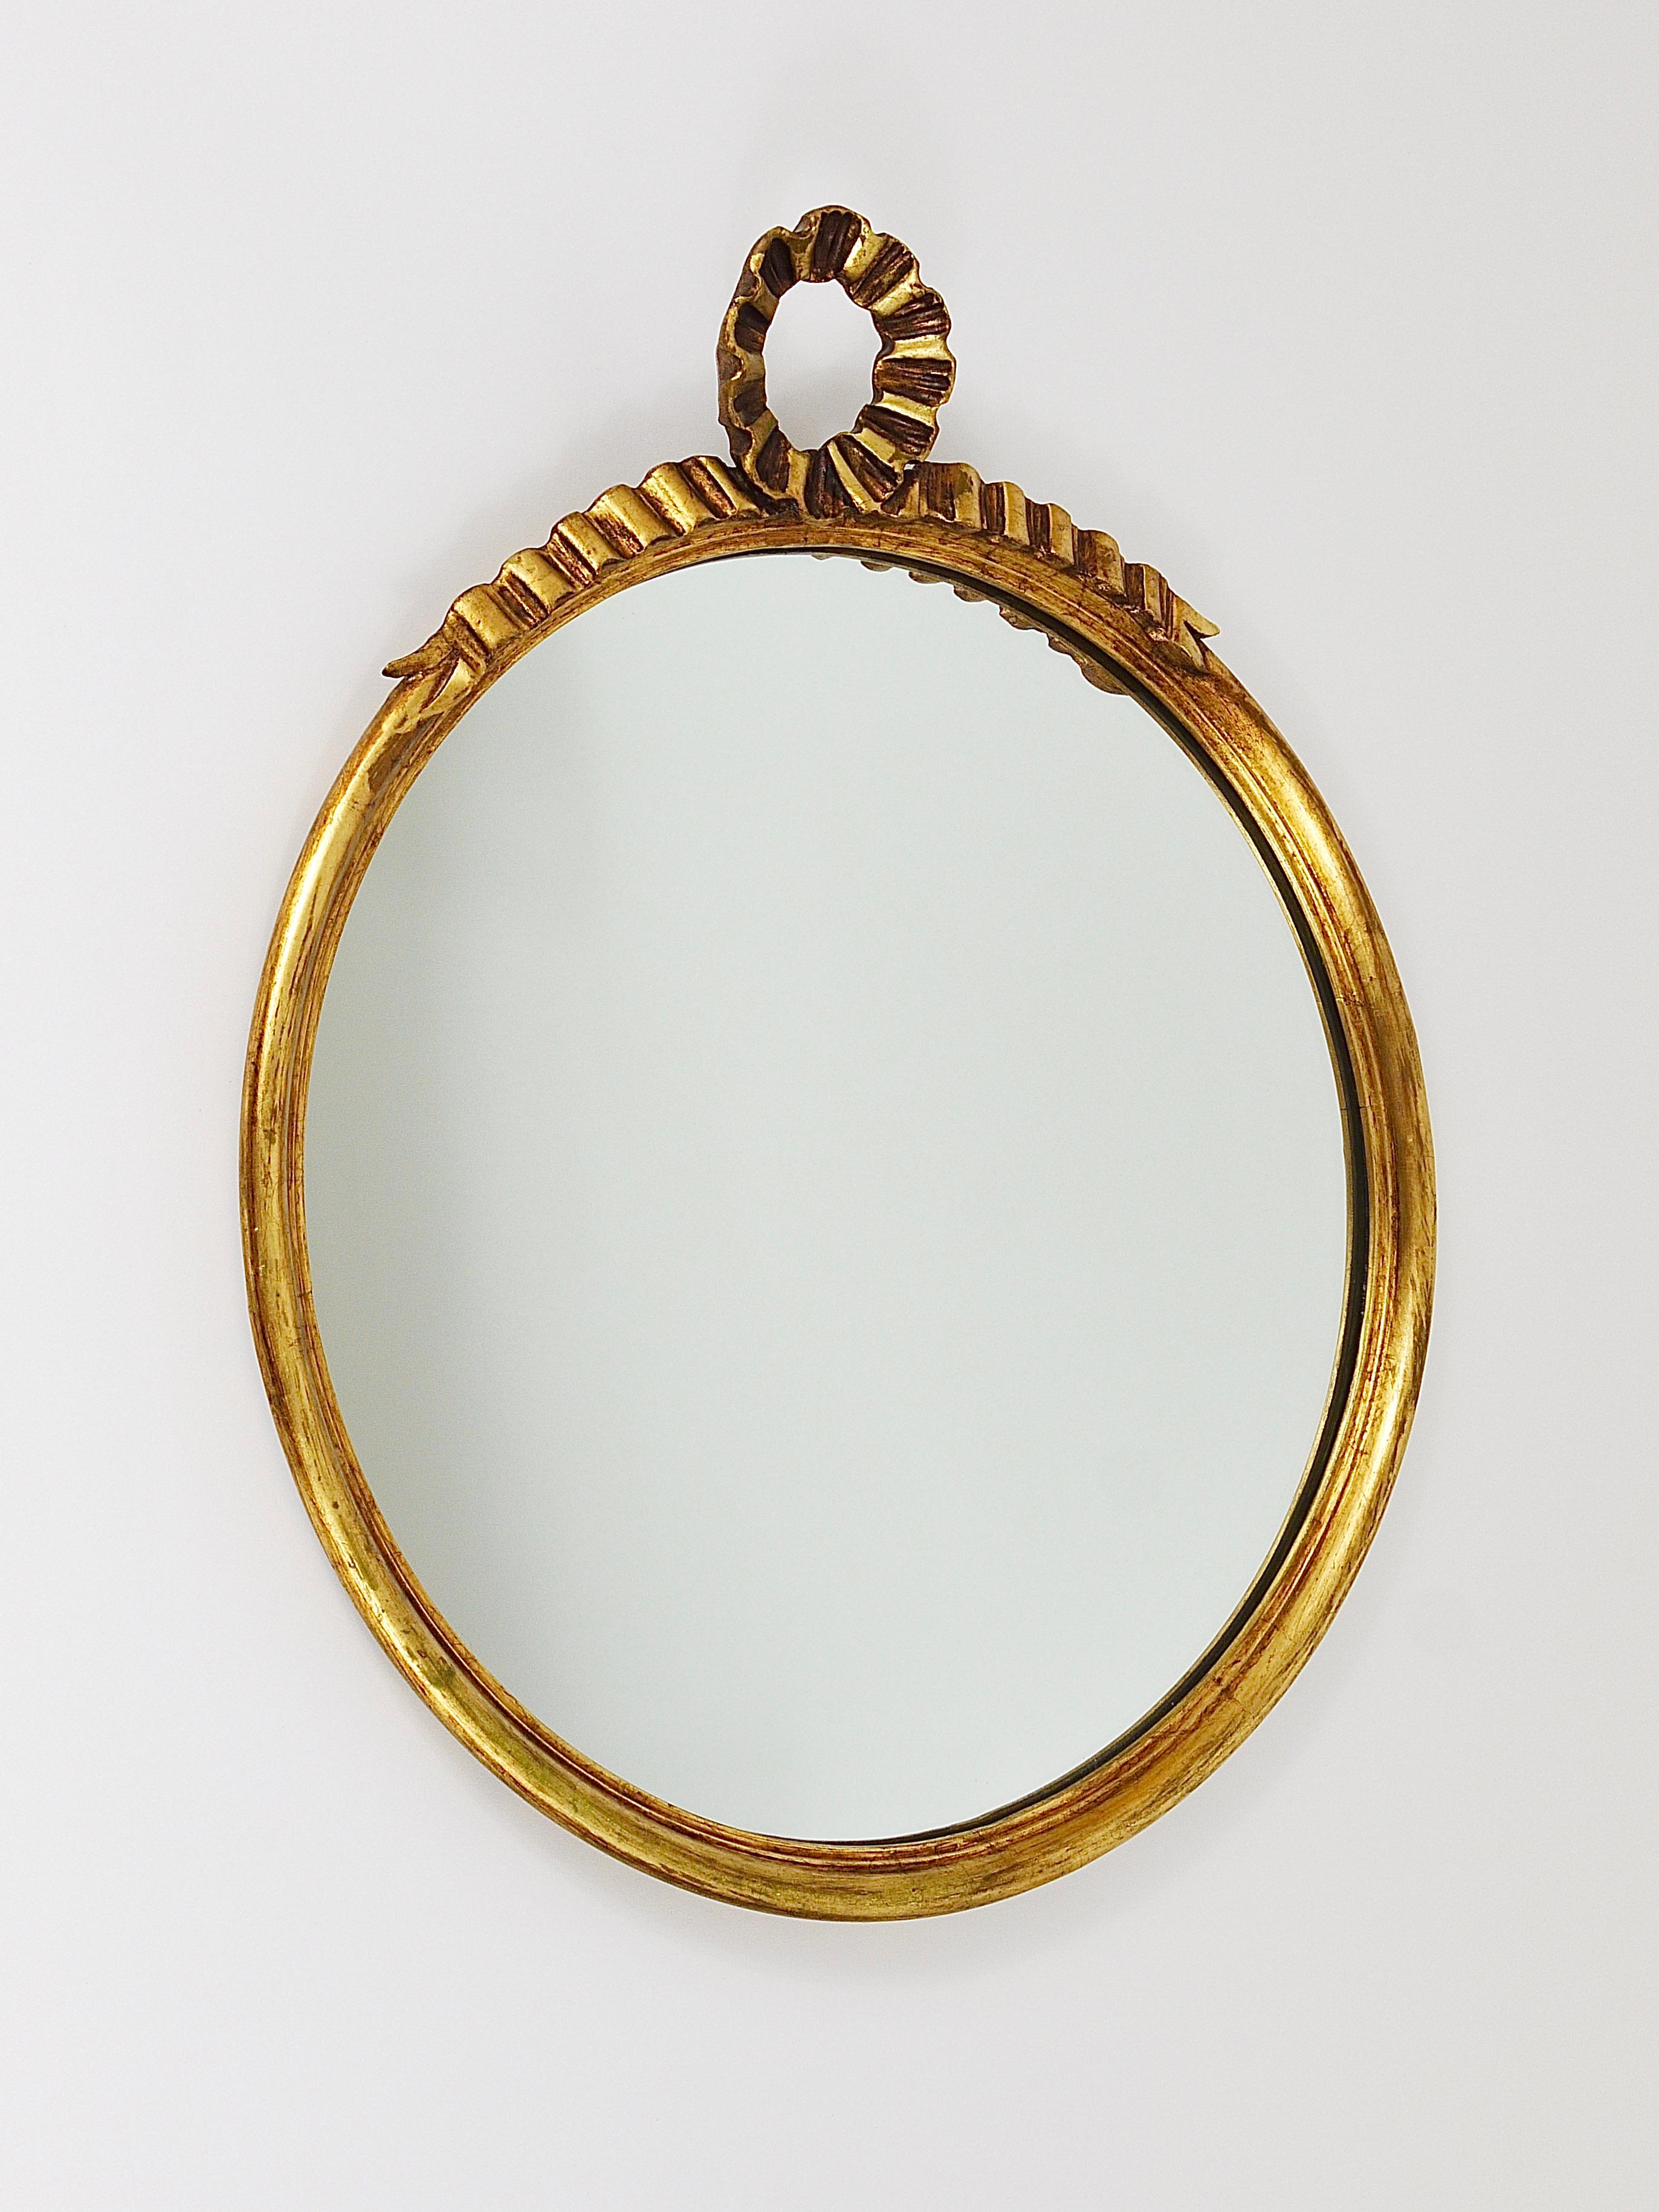 Round Midcentury Gilt Wood Wall Mirror, C. Allodi & G. Subelli, Italy, 1950s For Sale 9